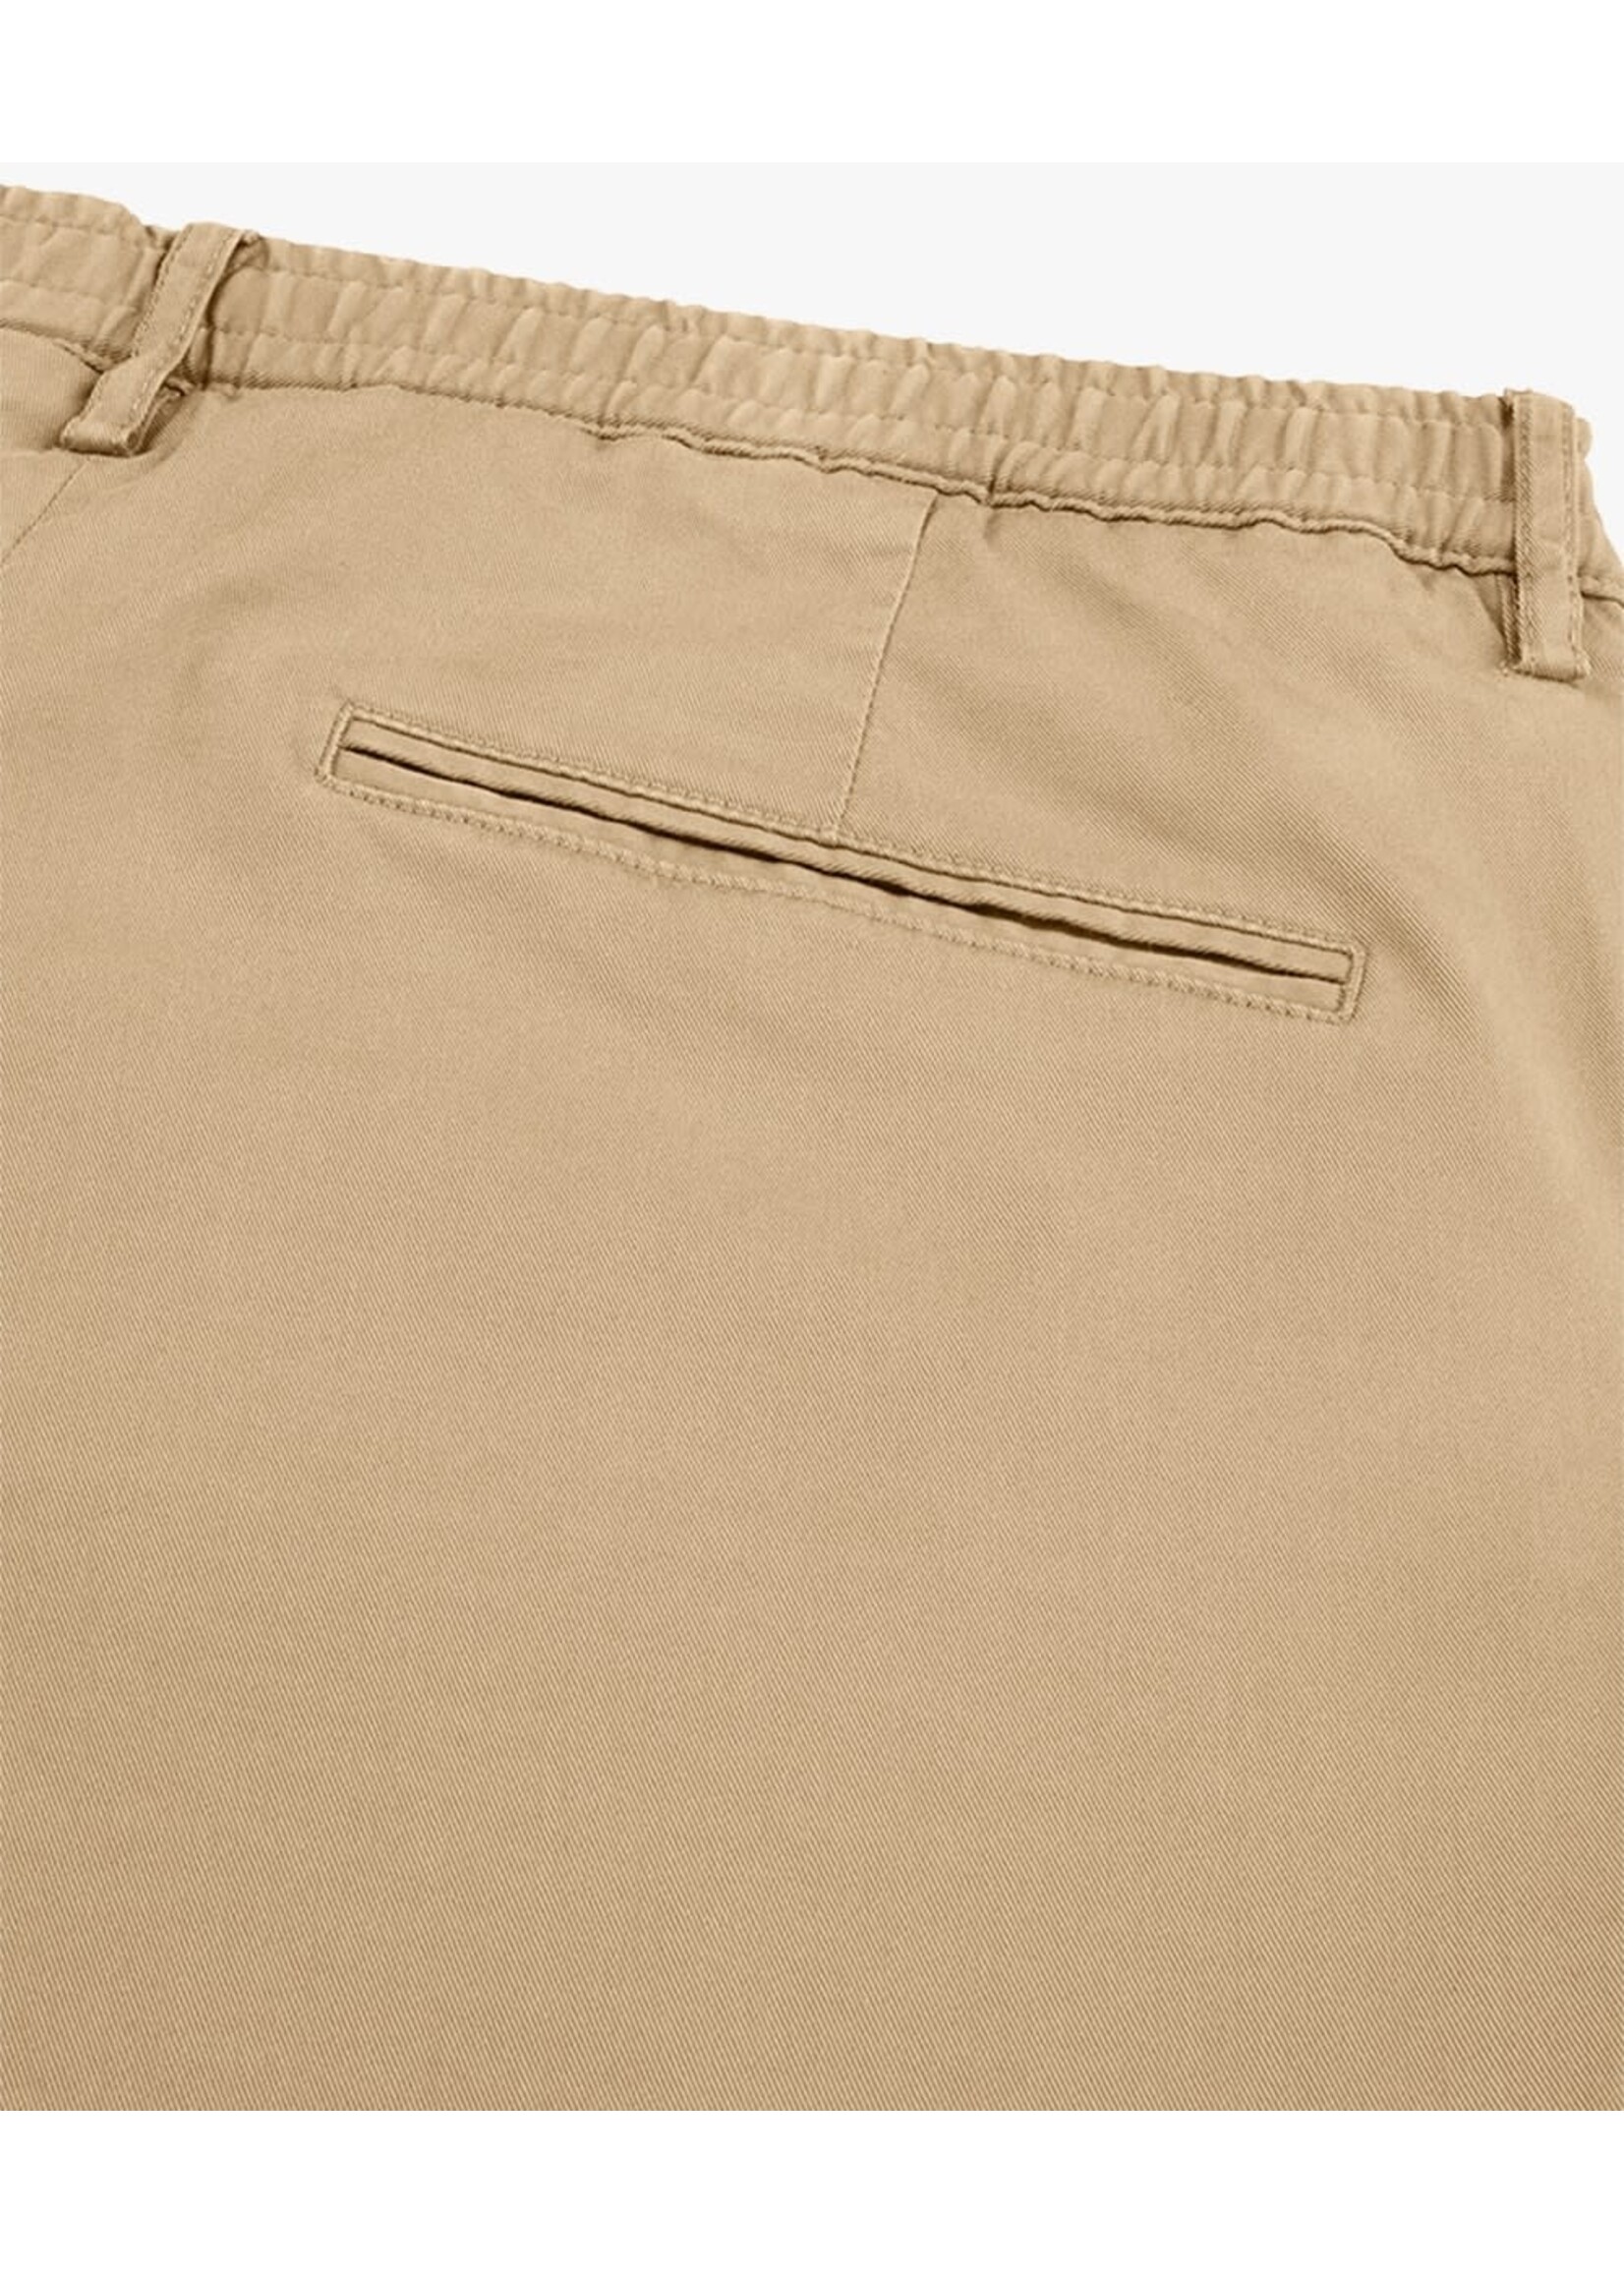 Trouser Sportcord GD Brown